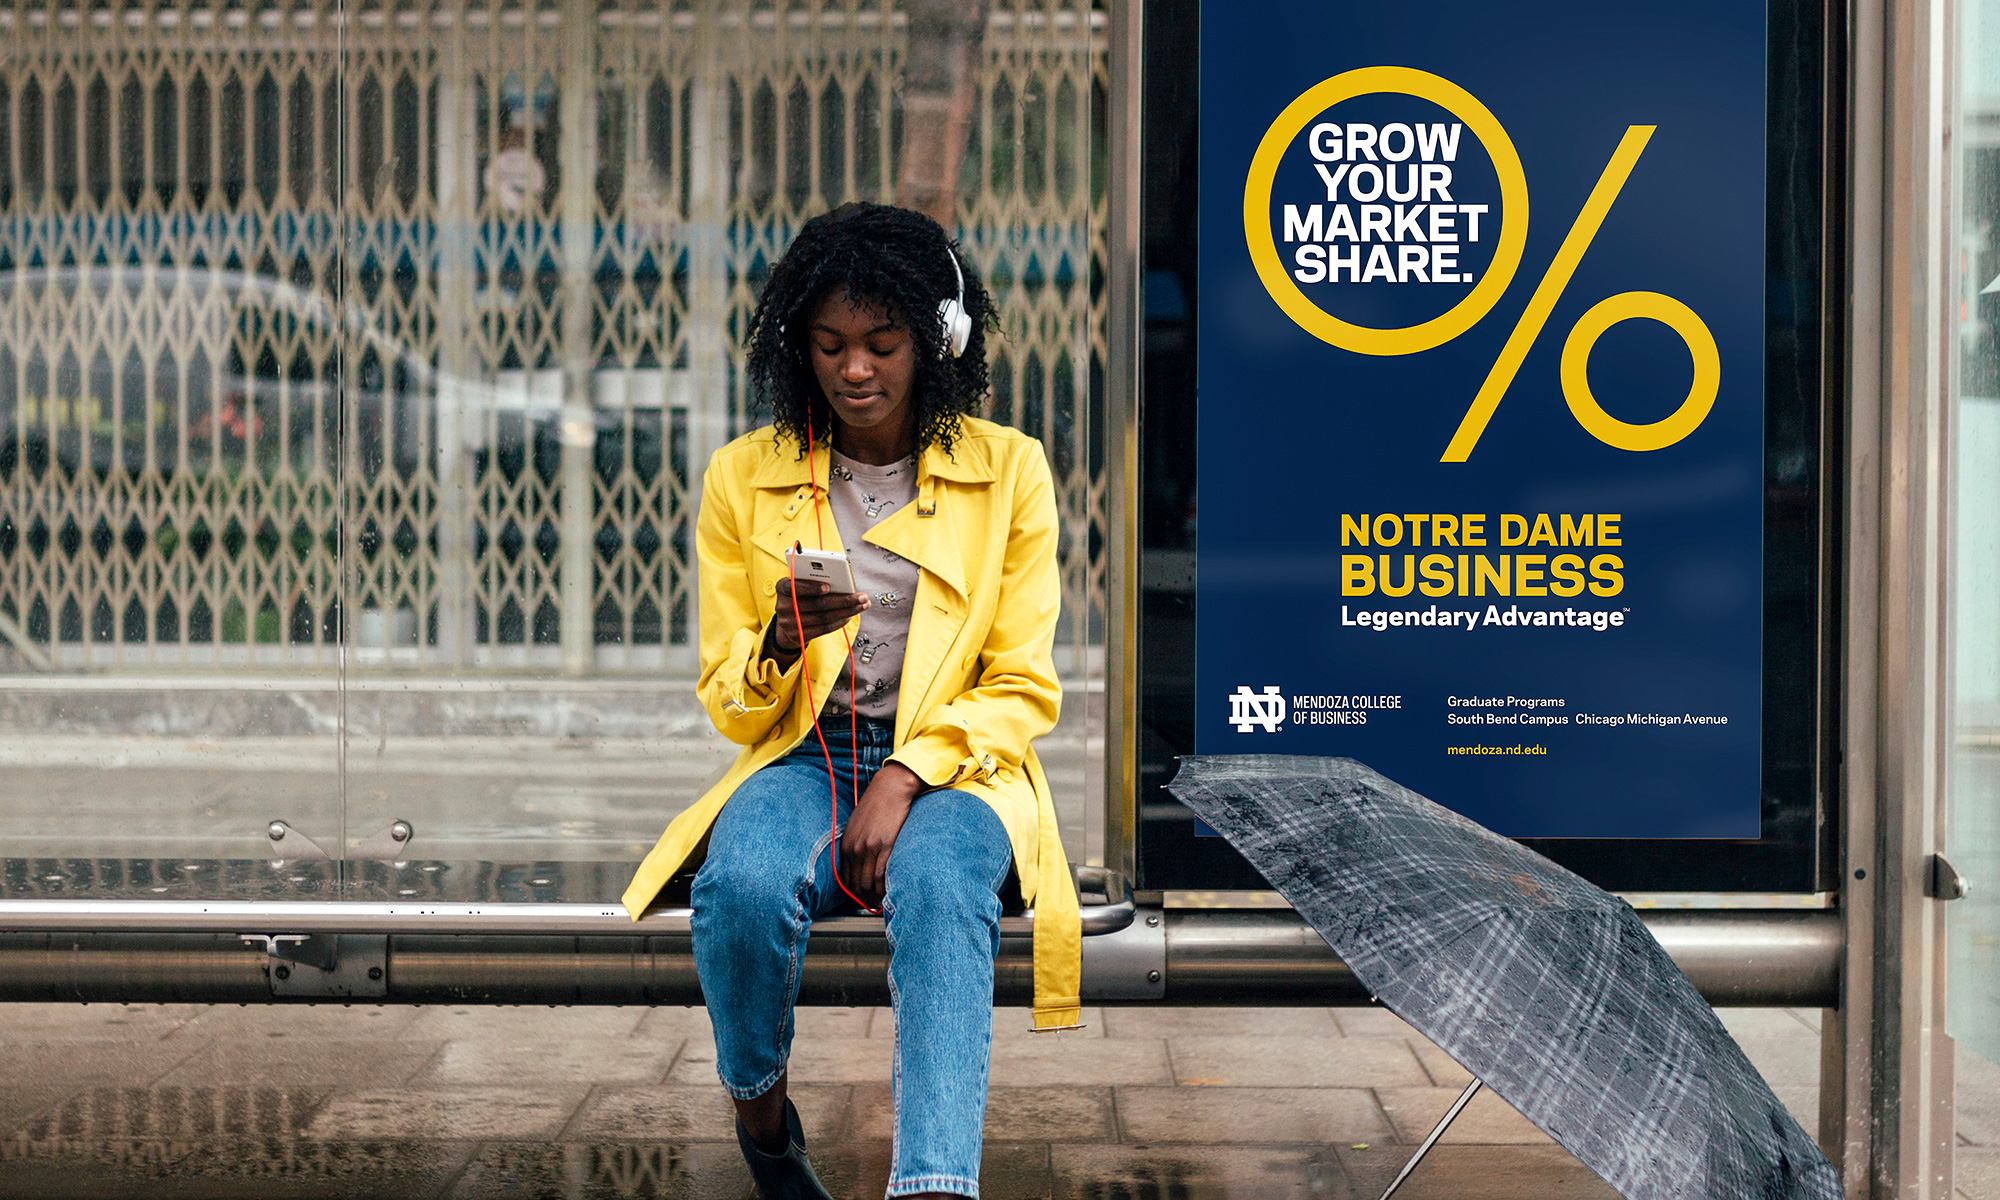 Young woman w umbrella sitting at bus stop by ND Mendoza Grow Your Market Share sign